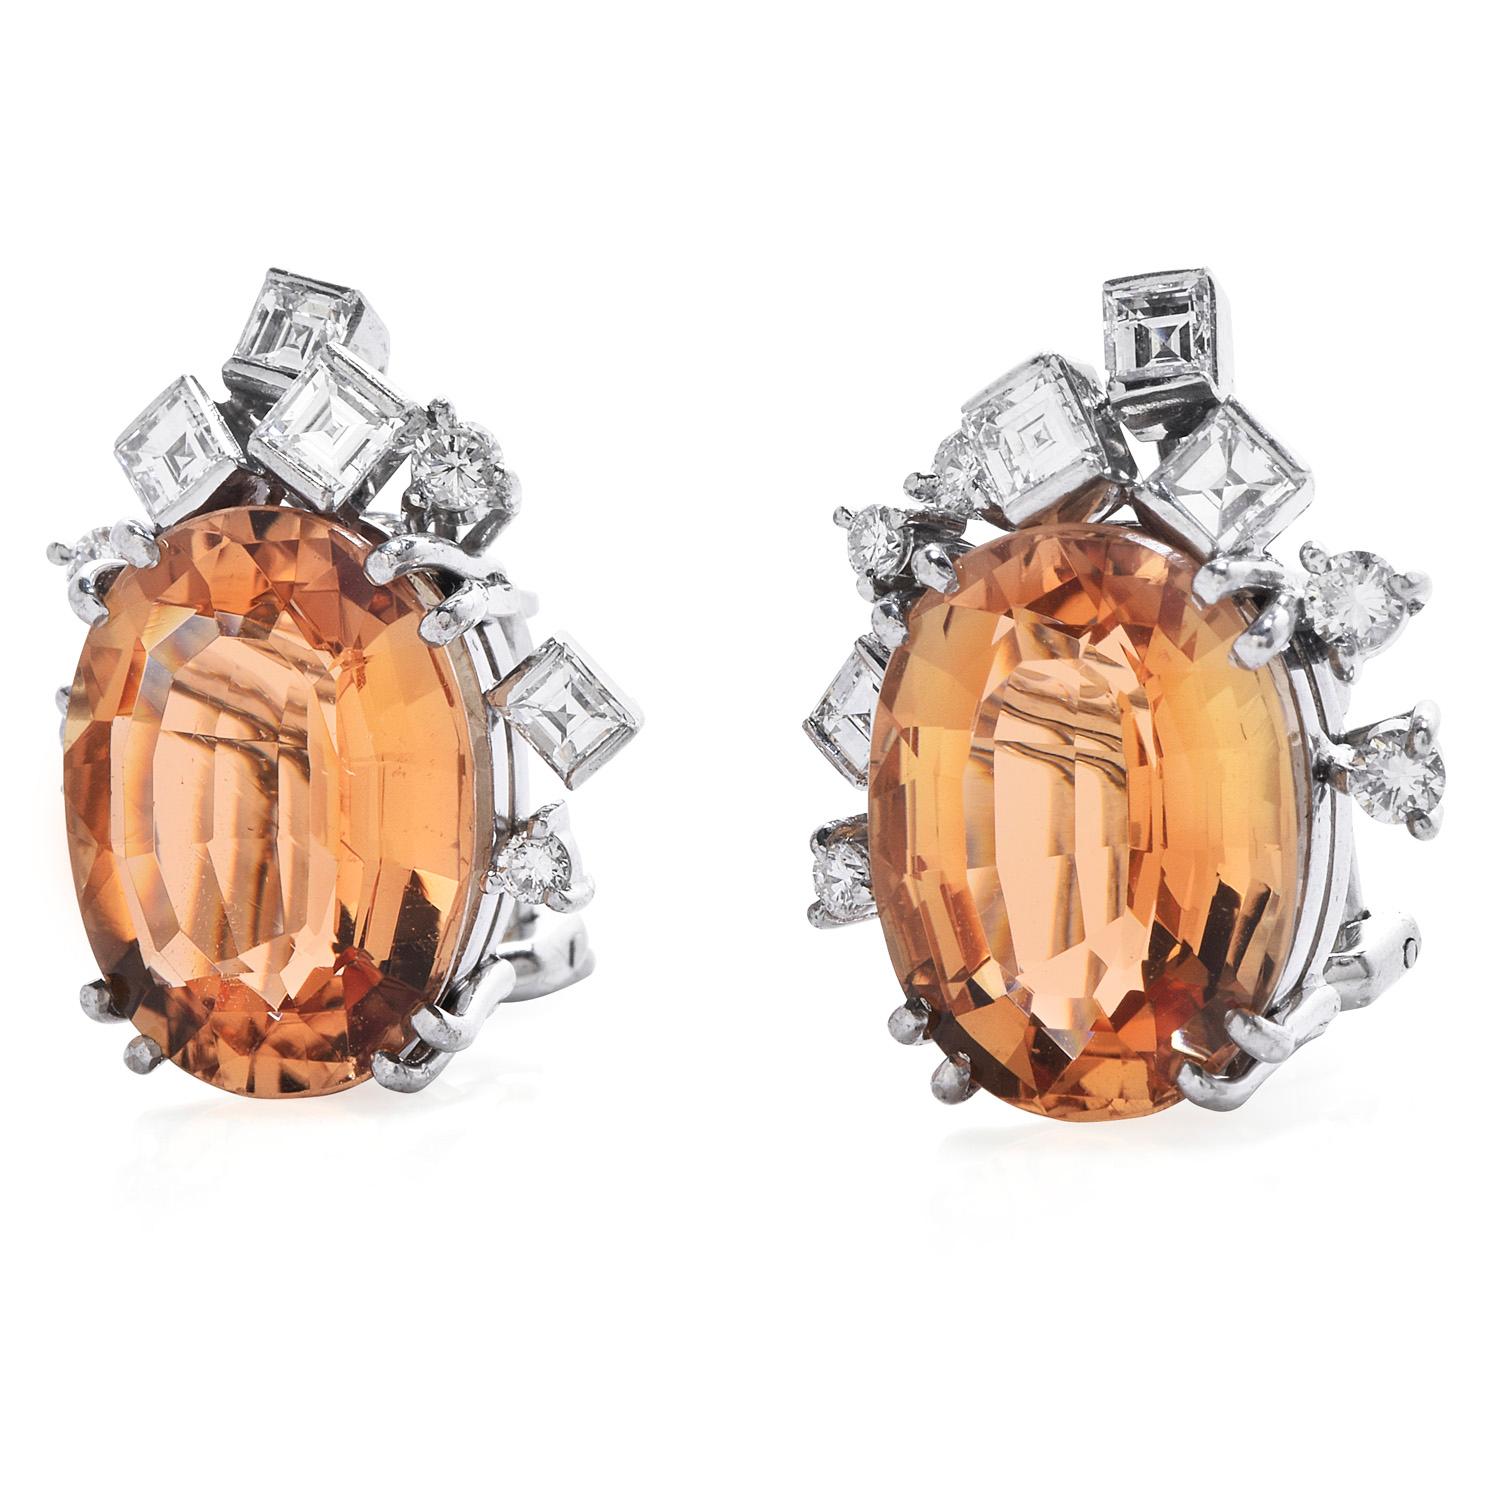 Vintage GIA 12.85ct Yellow Orange imperial Topaz Diamond 18K Gold Earrings

Add a Splash of color to your life

With these exquisite Topaz earrings reminiscent of the Sunrise and an approximate total weight of 11.0 Grams.

Expertly Crafted in 18K